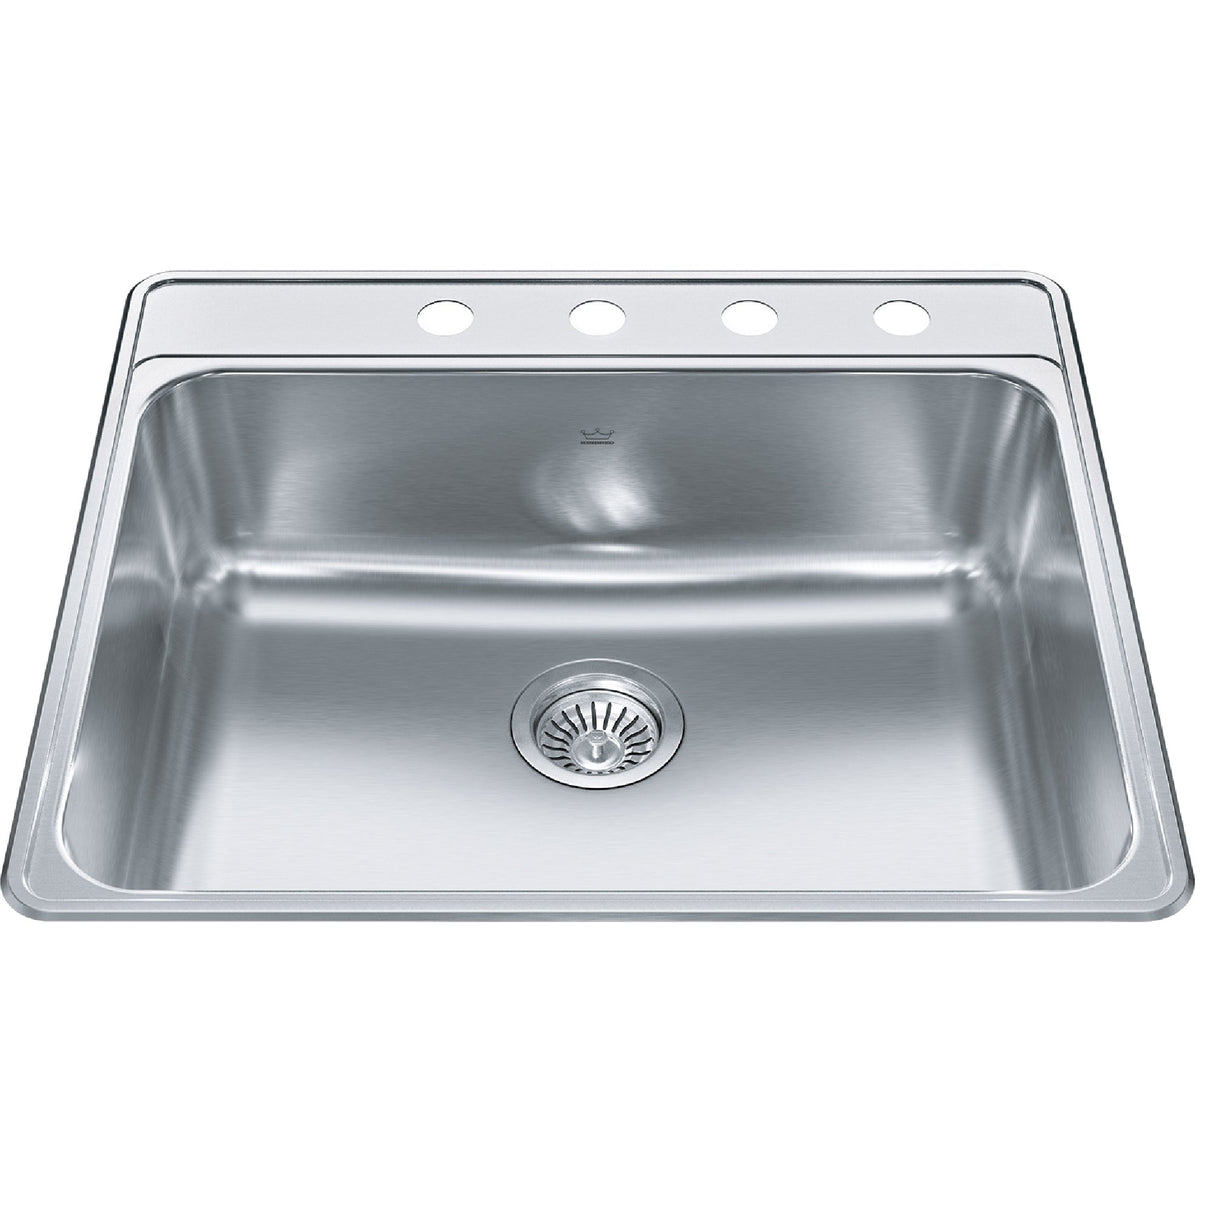 KINDRED CSLA2522-8-4CBN Creemore 25-in LR x 22-in FB x 8-in DP Drop In Single Bowl 4-Hole Stainless Steel Kitchen Sink In Commercial Satin Finish